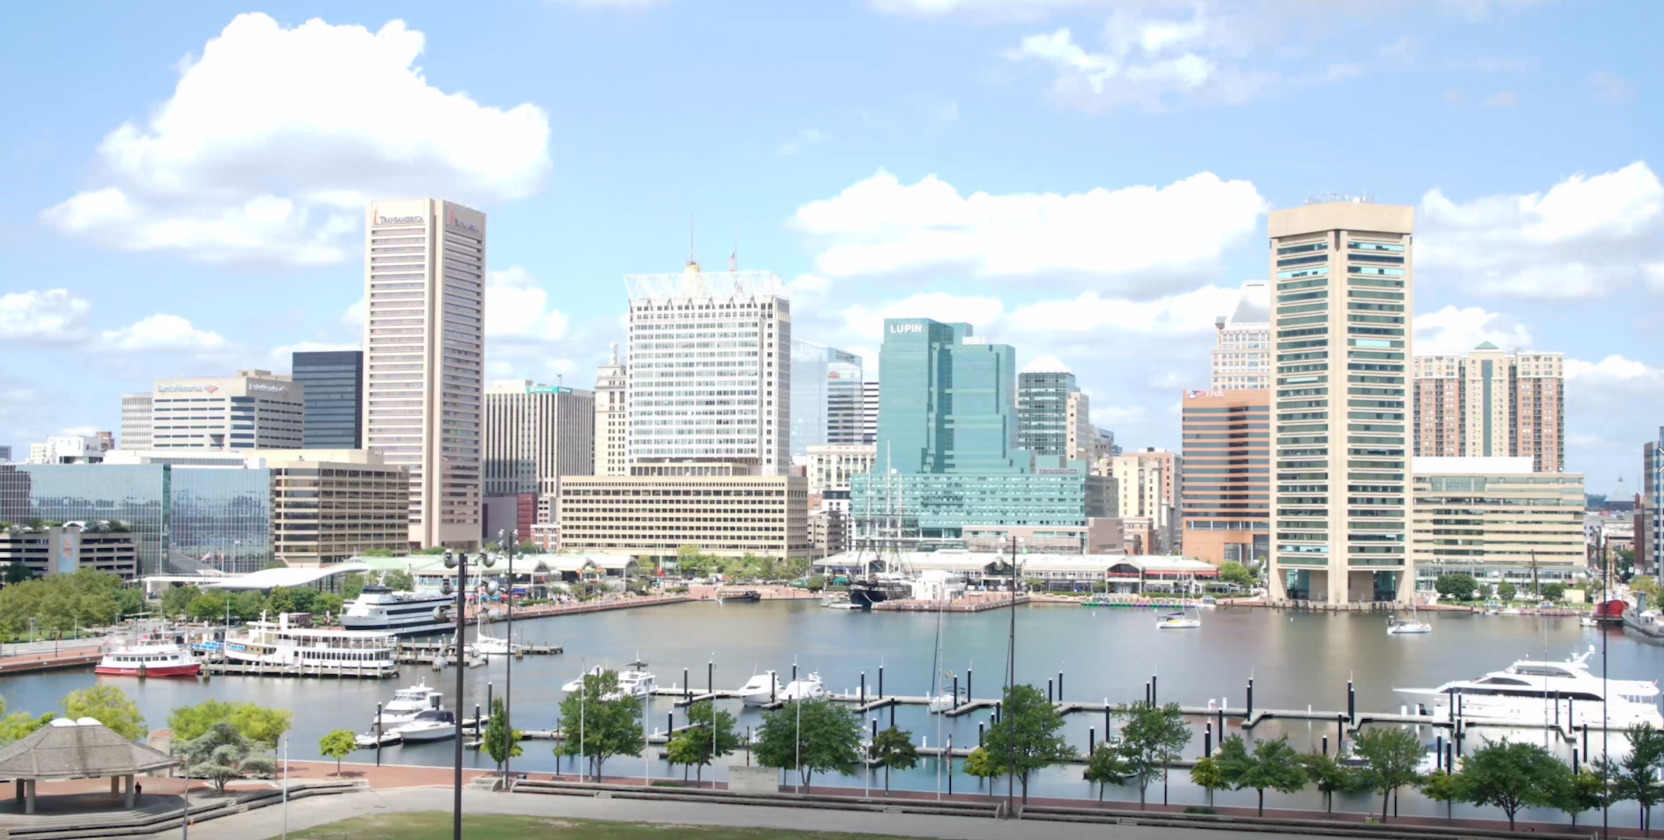 Baltimore Inner Harbor on a sunny day.